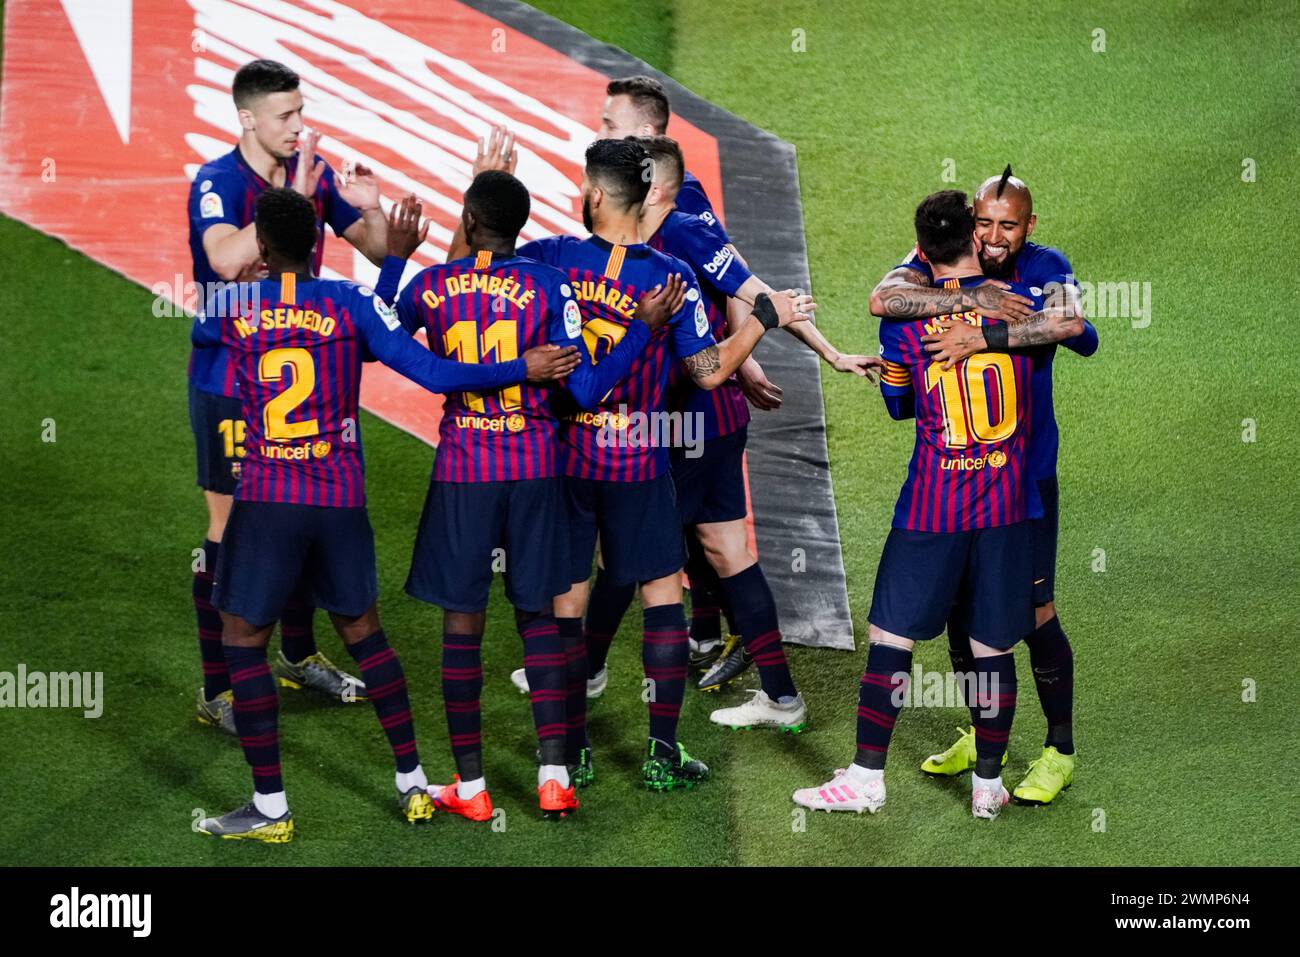 LIONEL MESSI, VIDAL, GOAL CELEBRATION, BARCELONA FC, 2019: Lionel Messi scores the winning goal in the 62nd minute and is hugged by Arturo Vidal as his teammates celebrate. The final game of the La Liga 2018-19 season in Spain between Barcelona FC and Levante at Camp Nou, Barcelona on 27 April 2019. Barca won the game 1-0 with a second half Messi goal to clinch back-to-back La Liga titles and their eighth in 11 years. Stock Photo